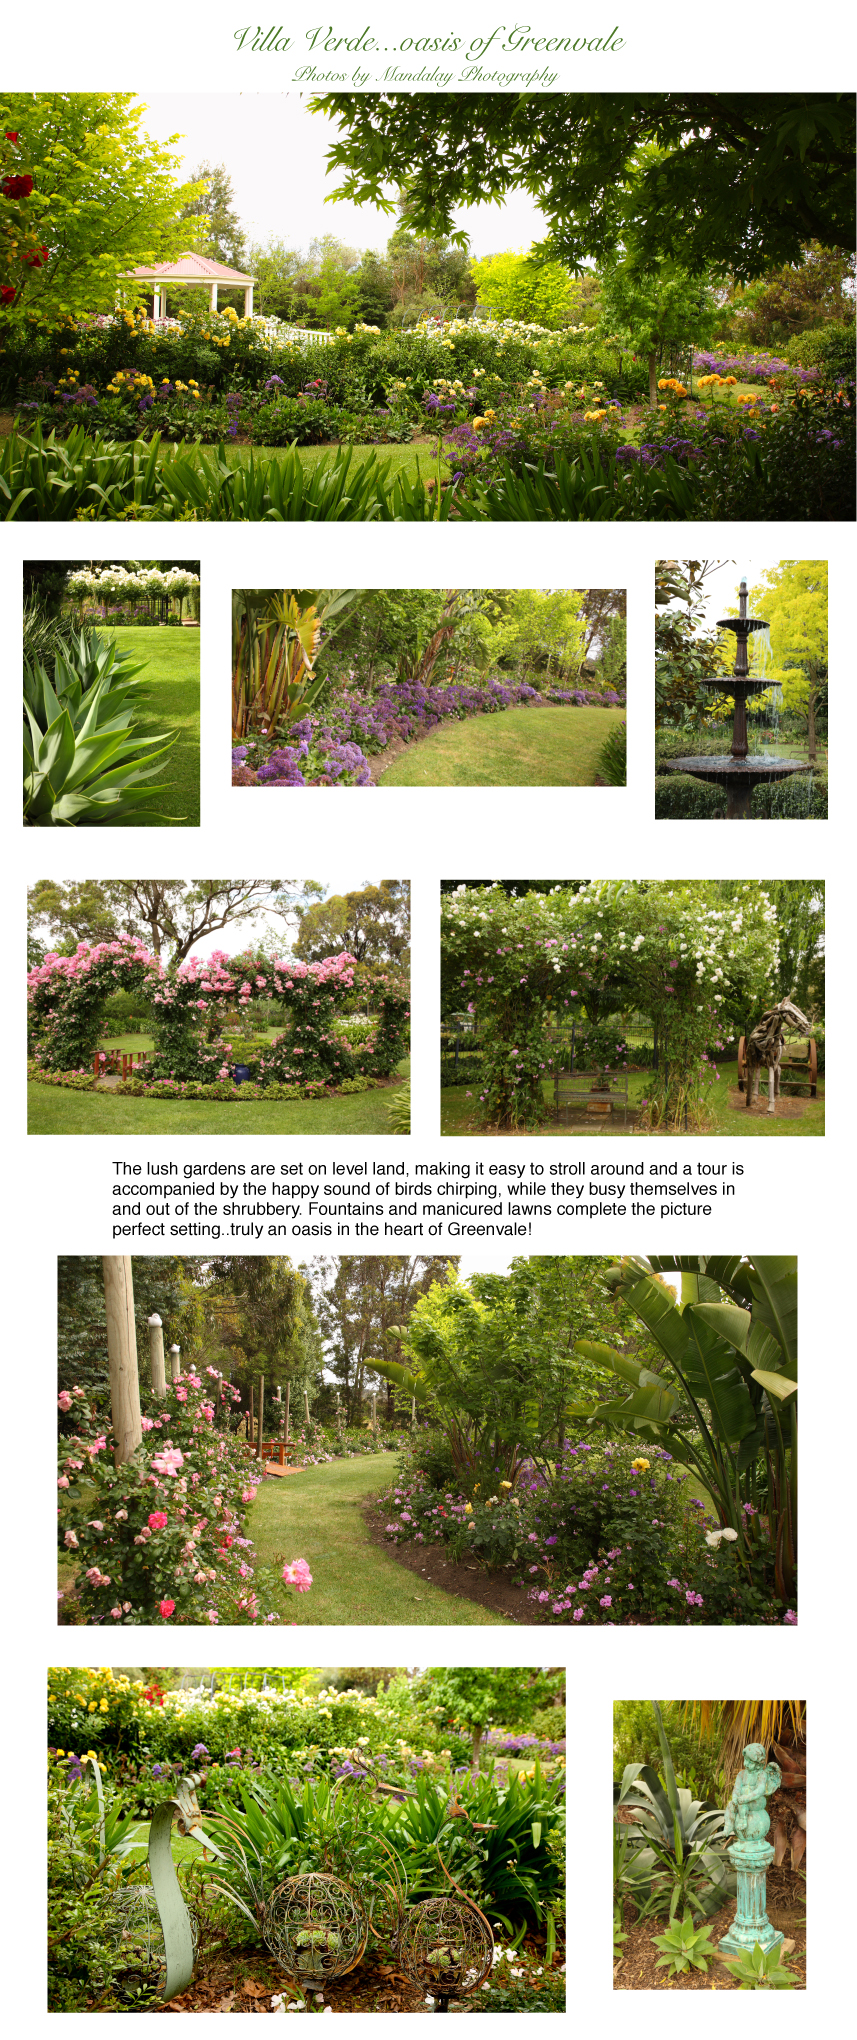 Villa Verde Gardens in Greenvale, exquisite photos by Mandalay Photography